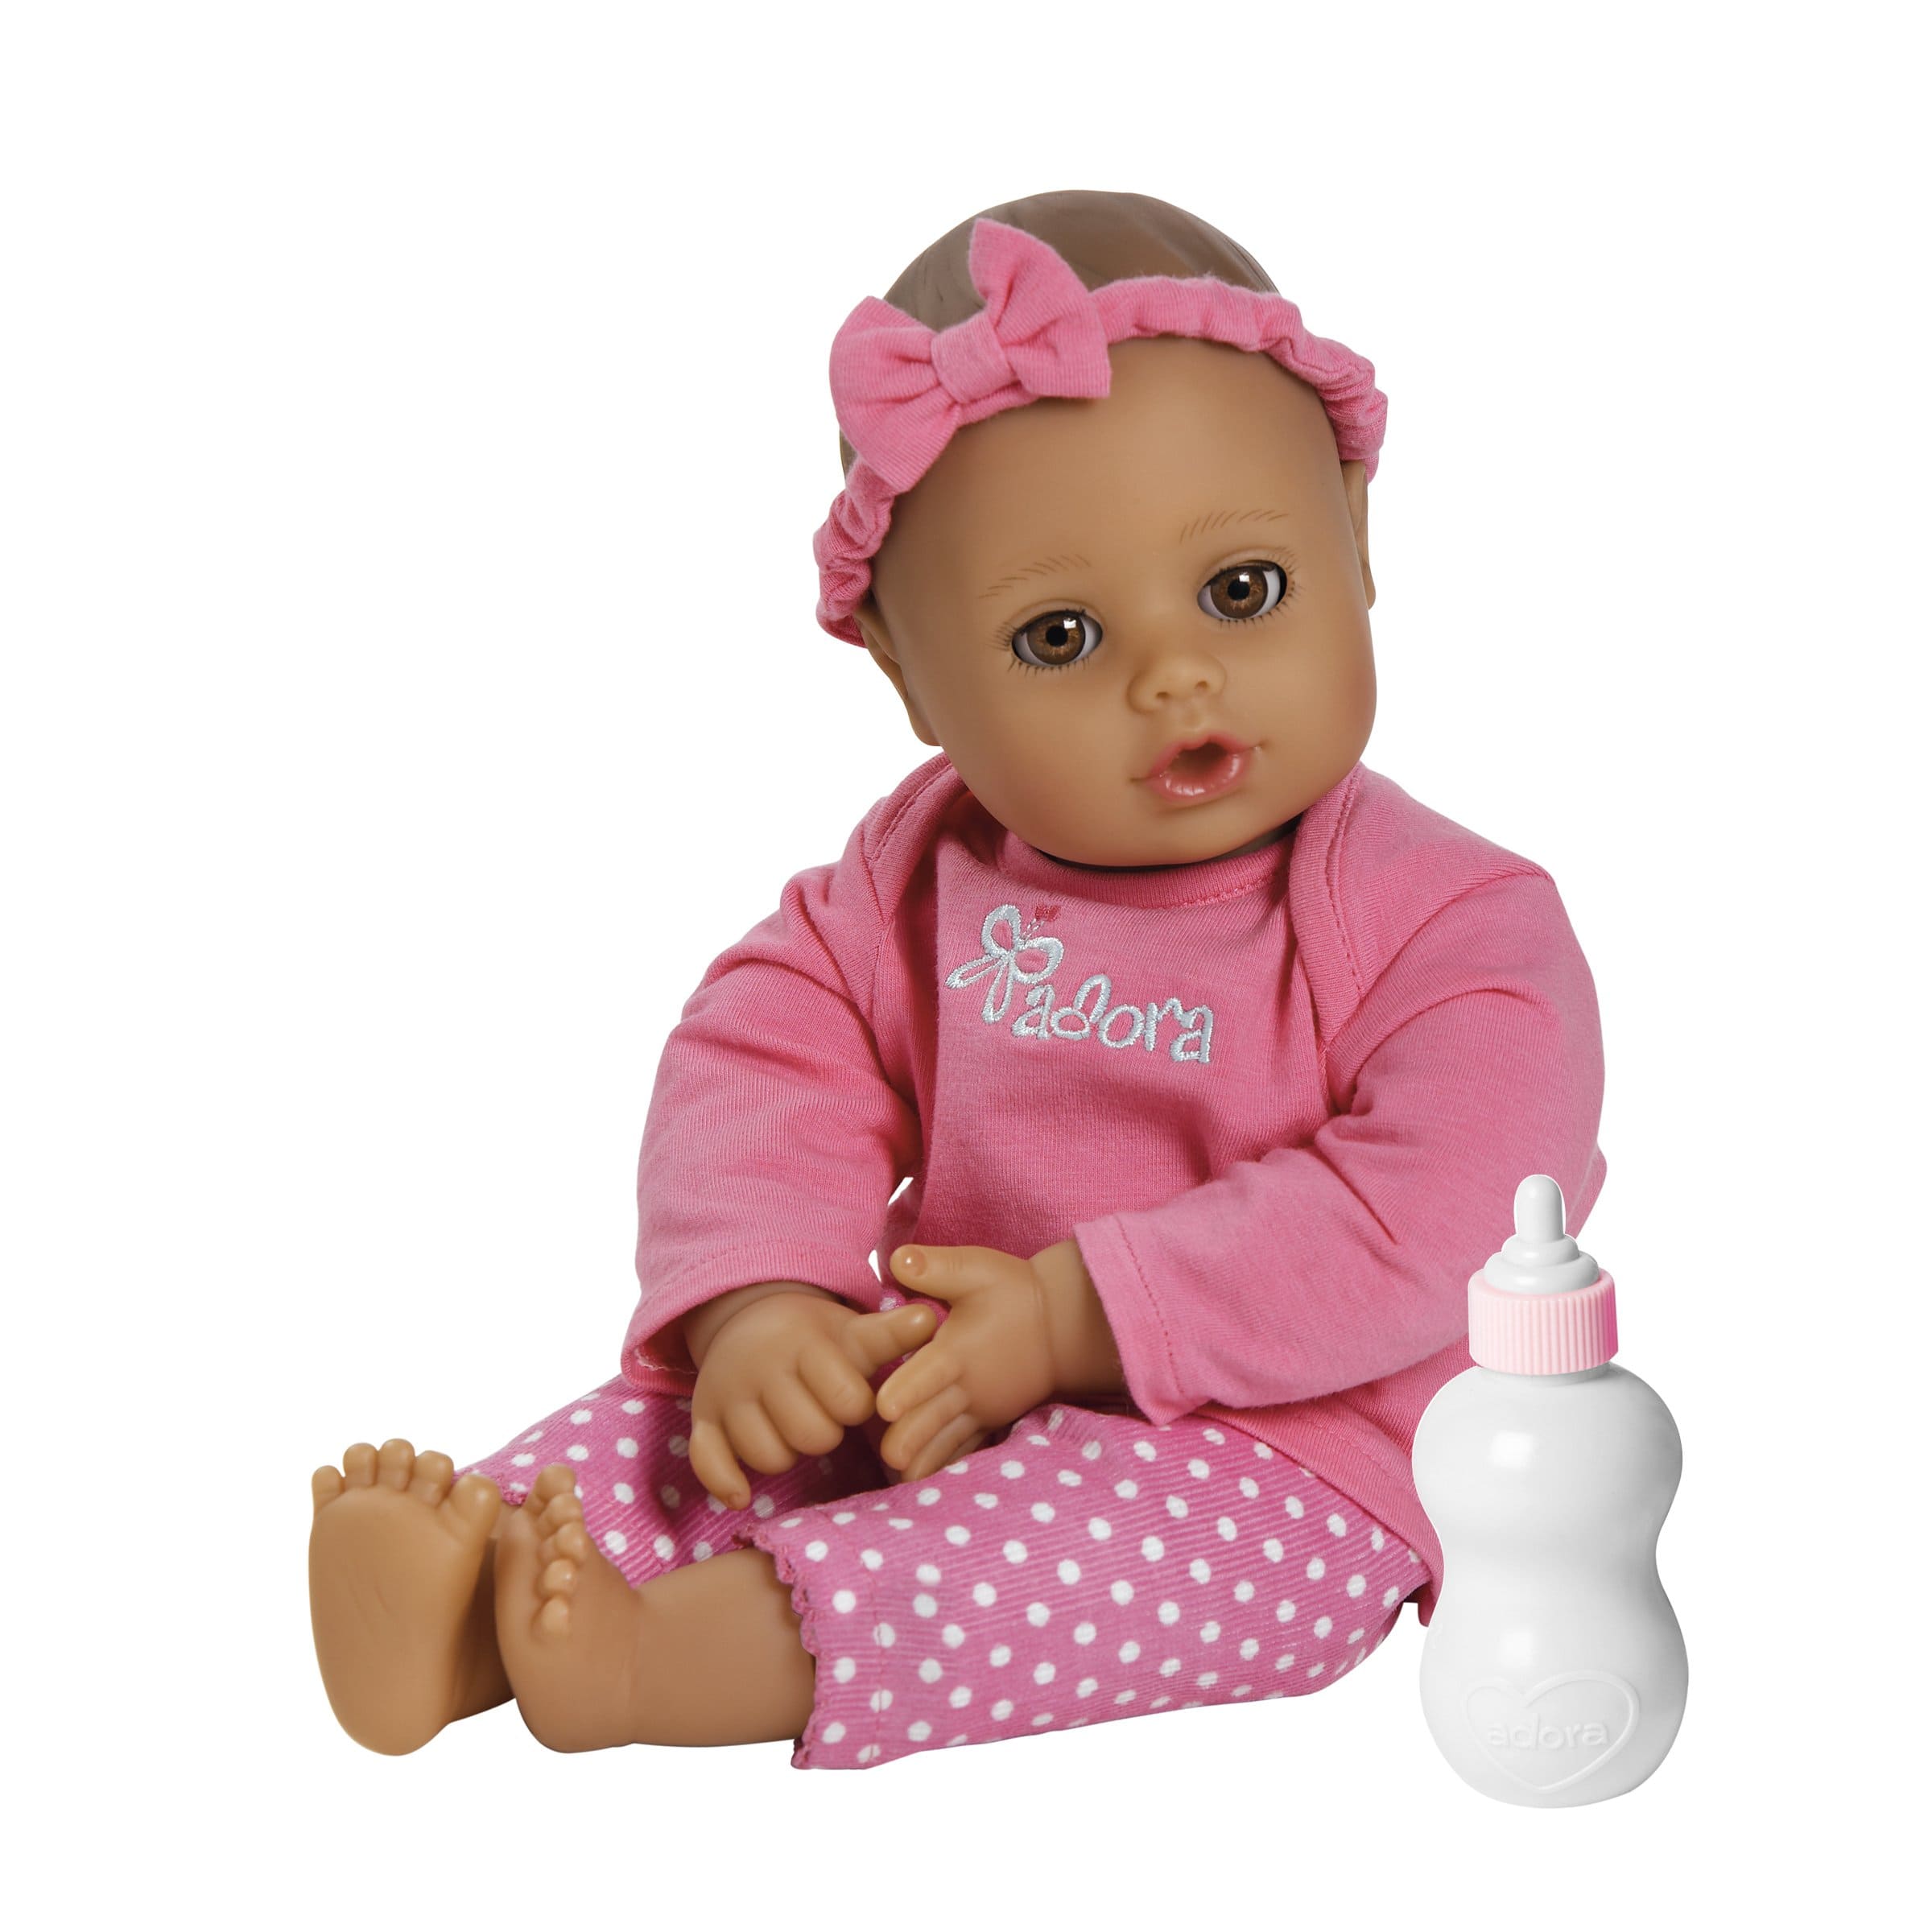 Adora 13-inch Playtime Baby Girl Doll in Pink